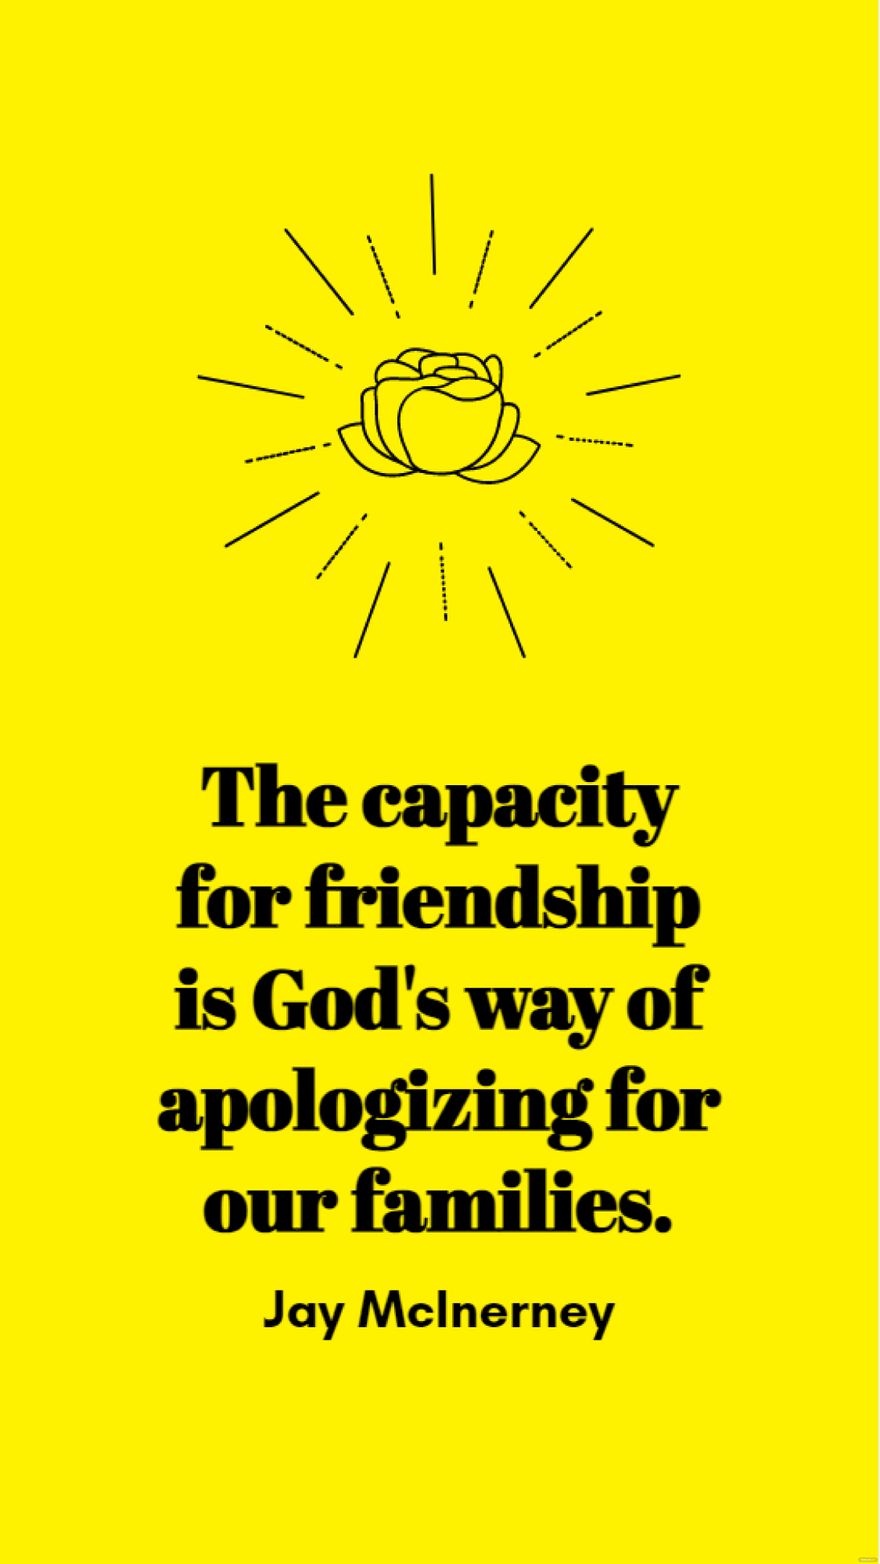 Free Jay McInerney - The capacity for friendship is God's way of apologizing for our families. in JPG